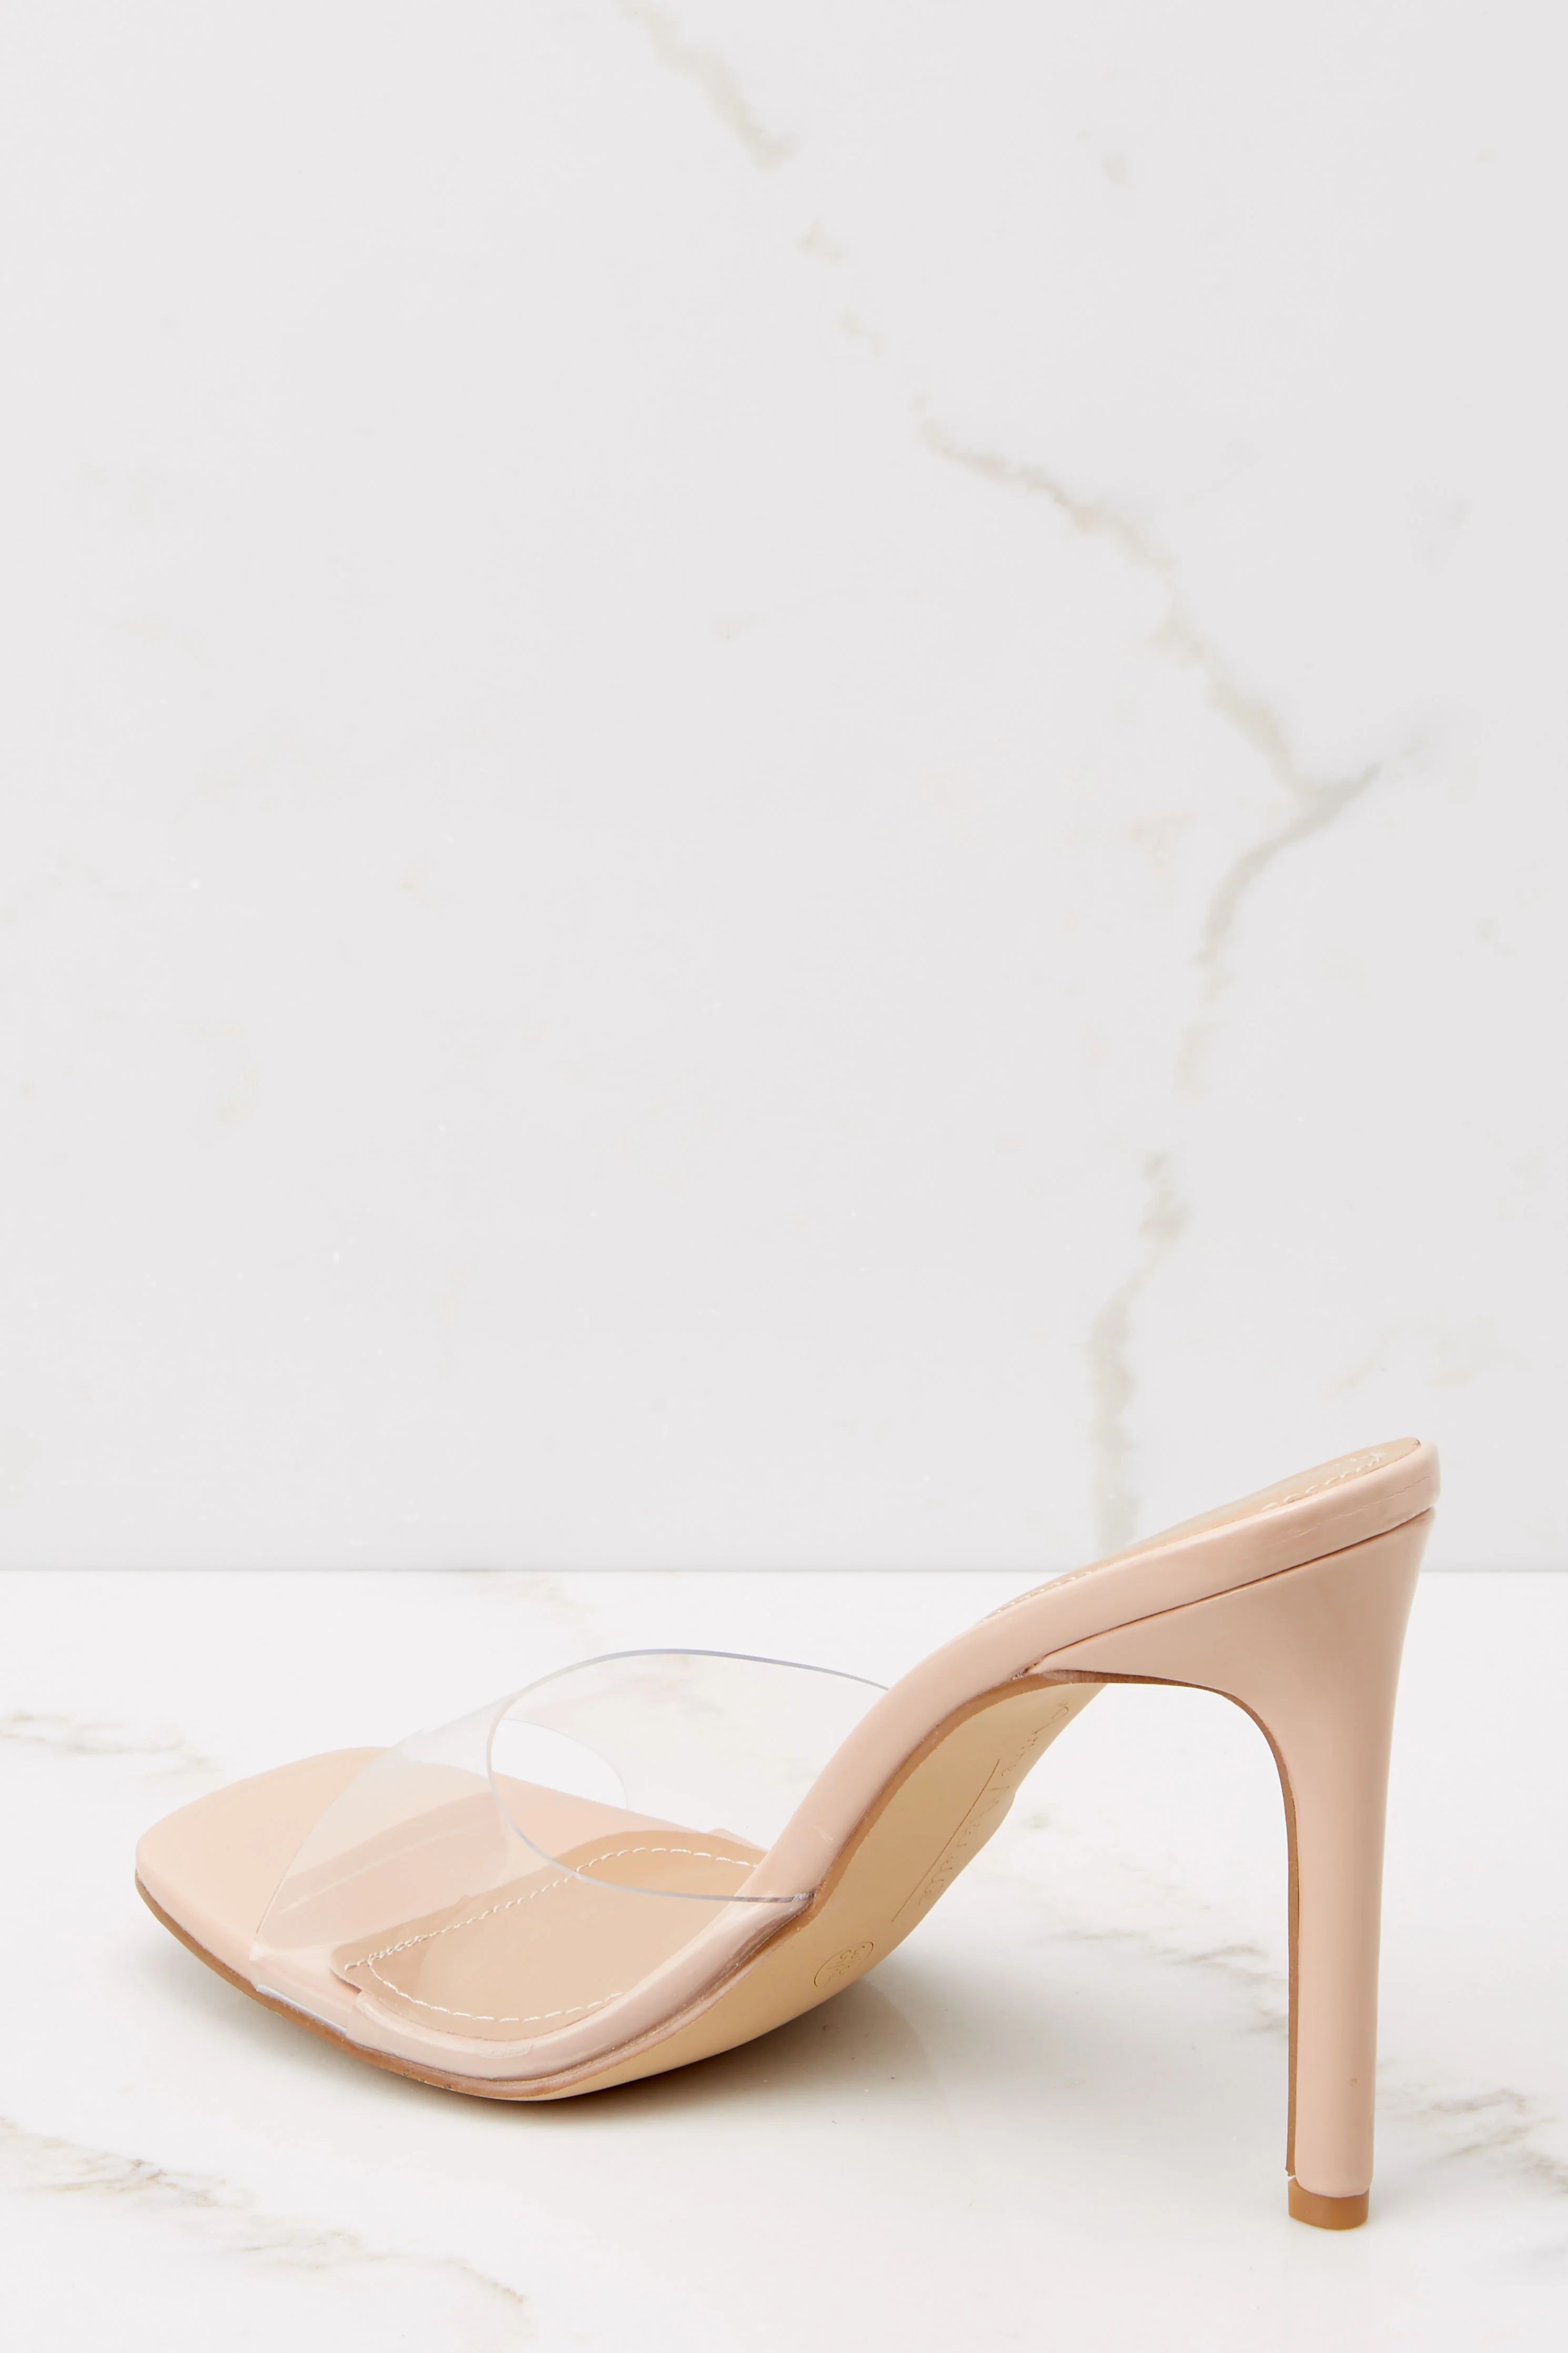 Tread Lightly Nude And Clear Heels | Red Dress 